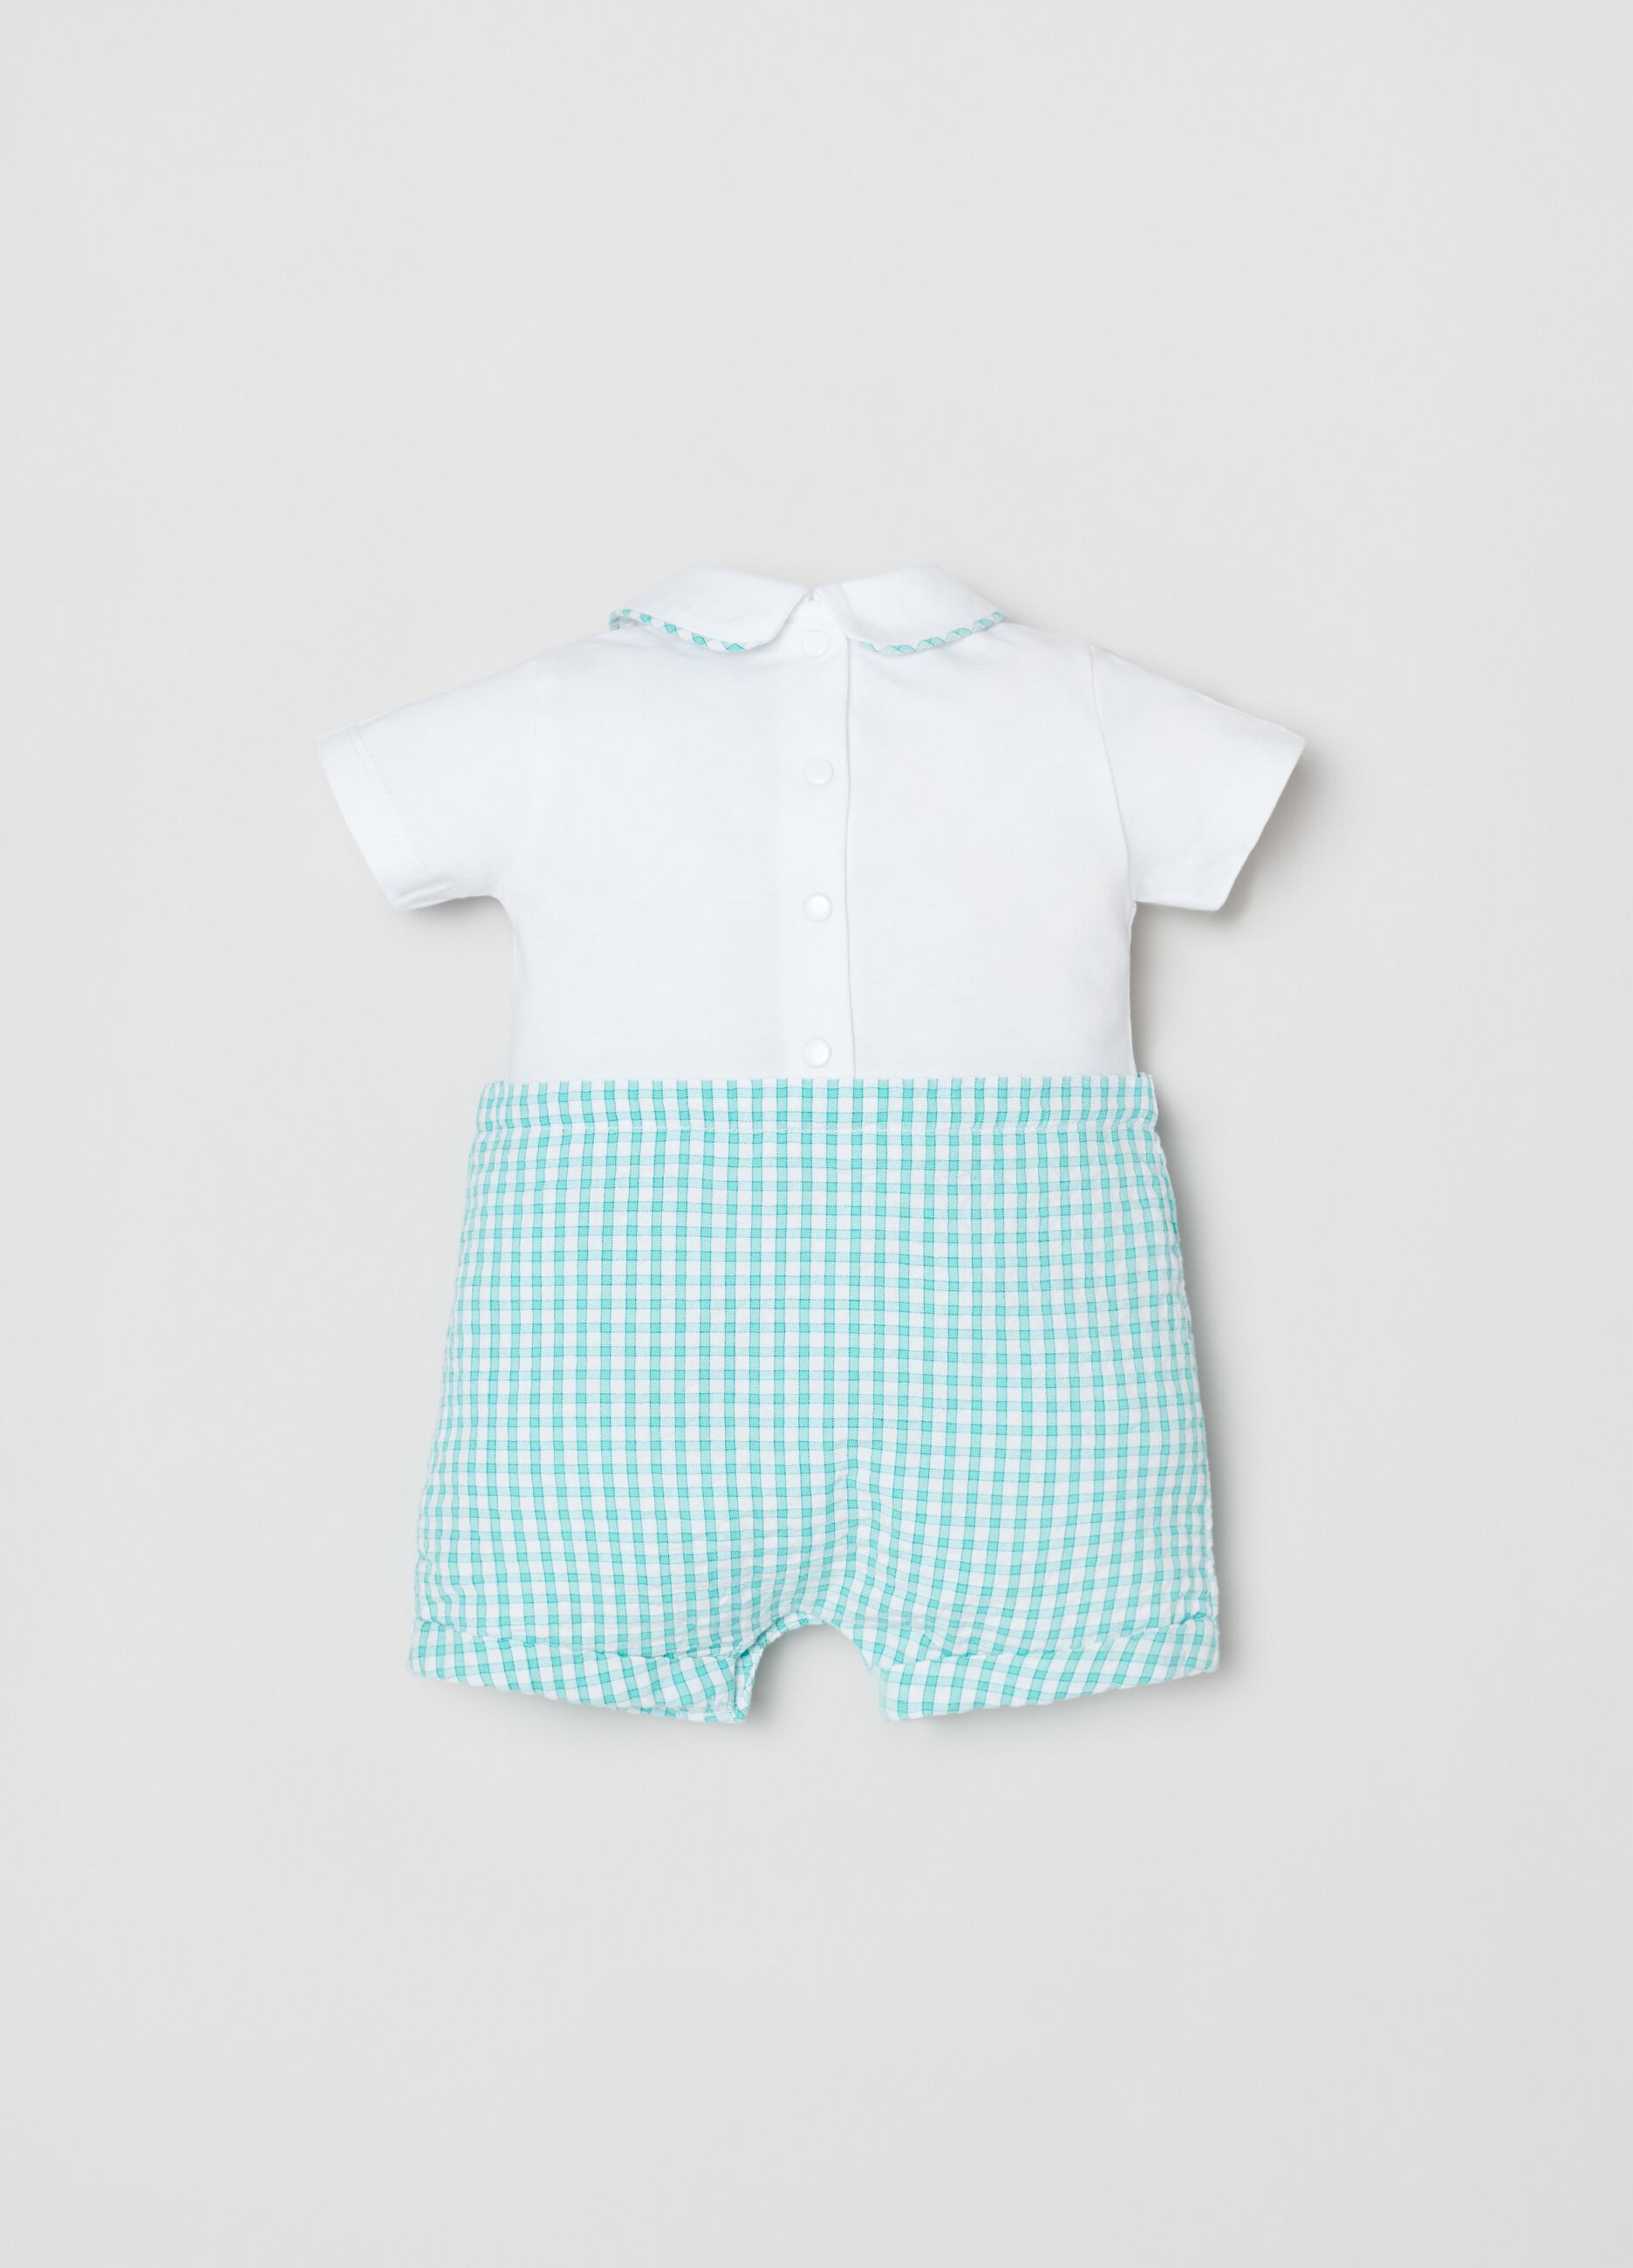 Cotton romper suit with gingham pattern